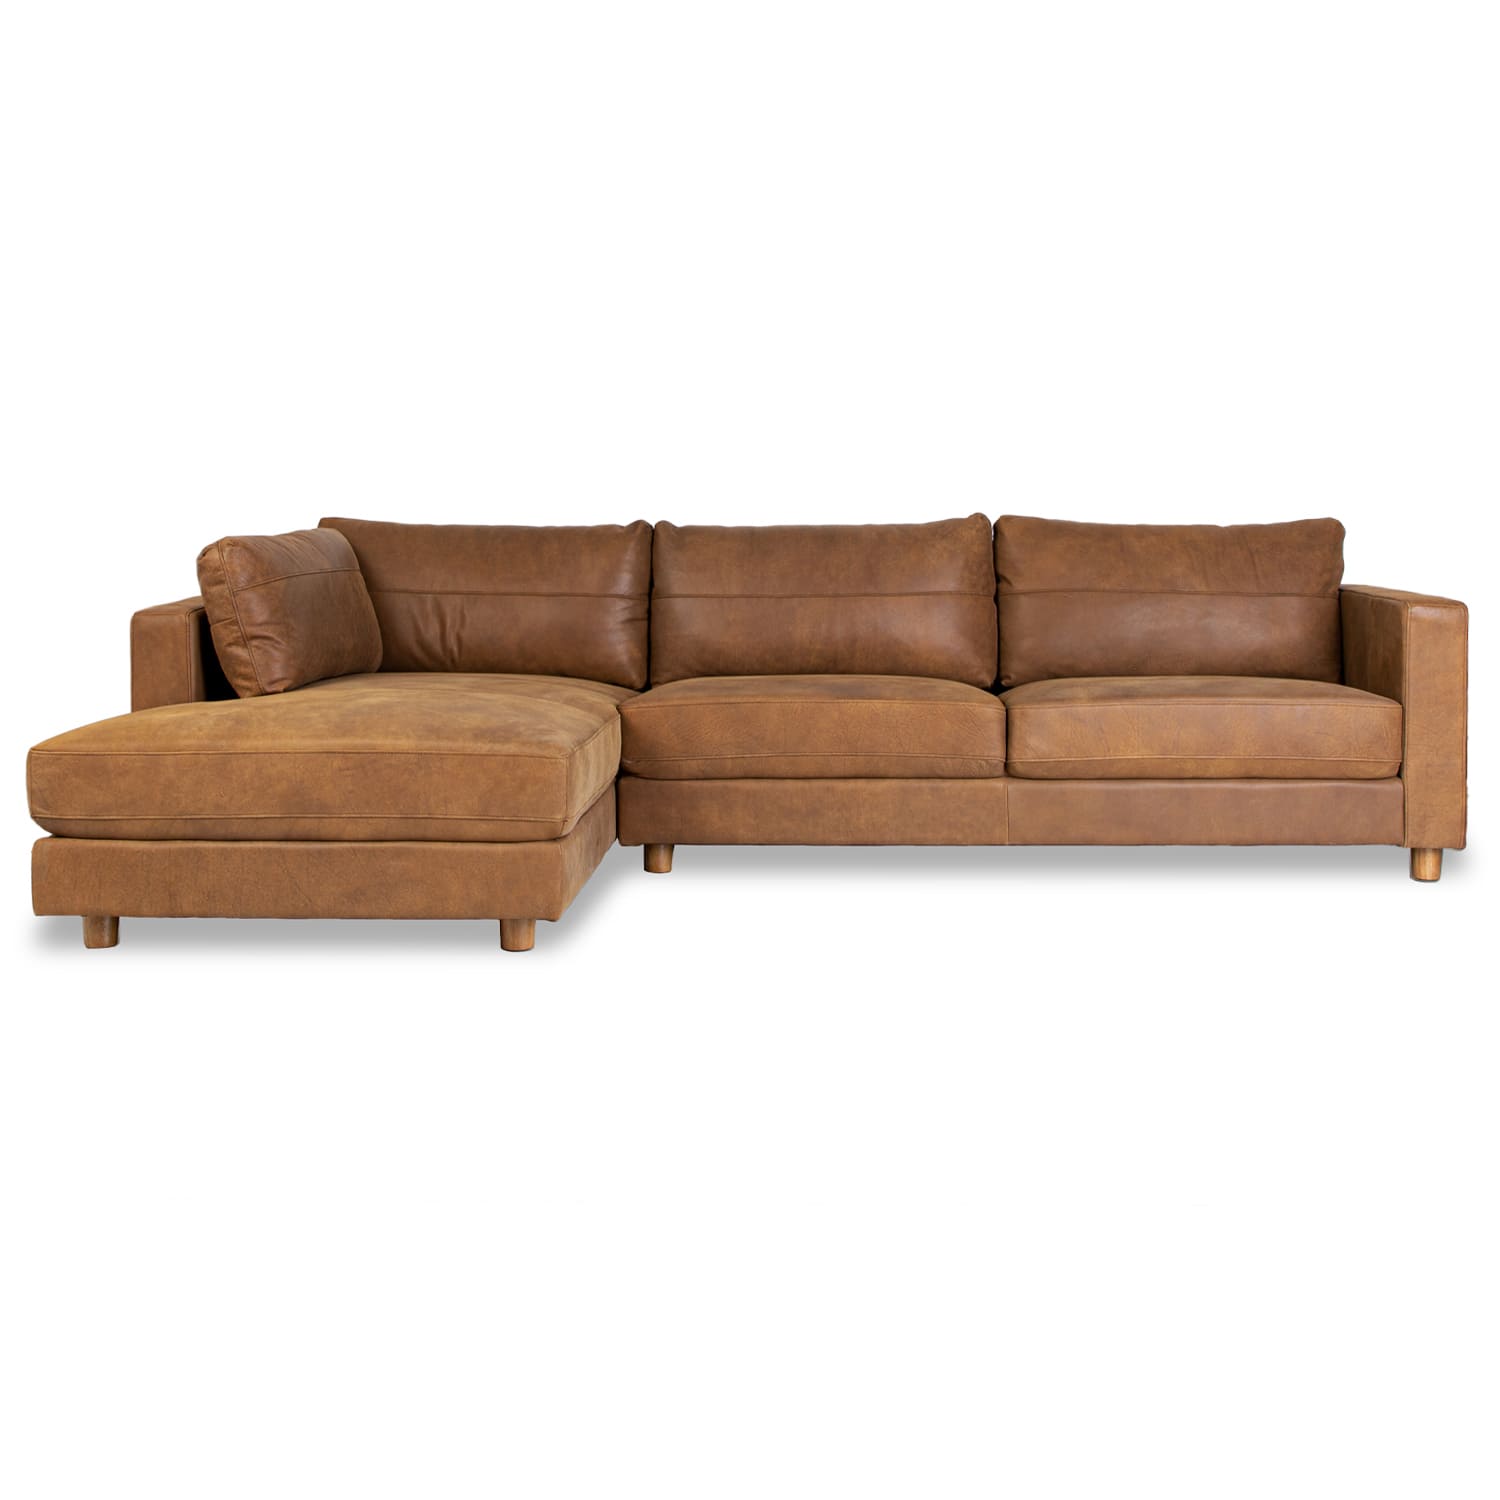 Barcelona Leather Left Side Facing Chaise Lounge